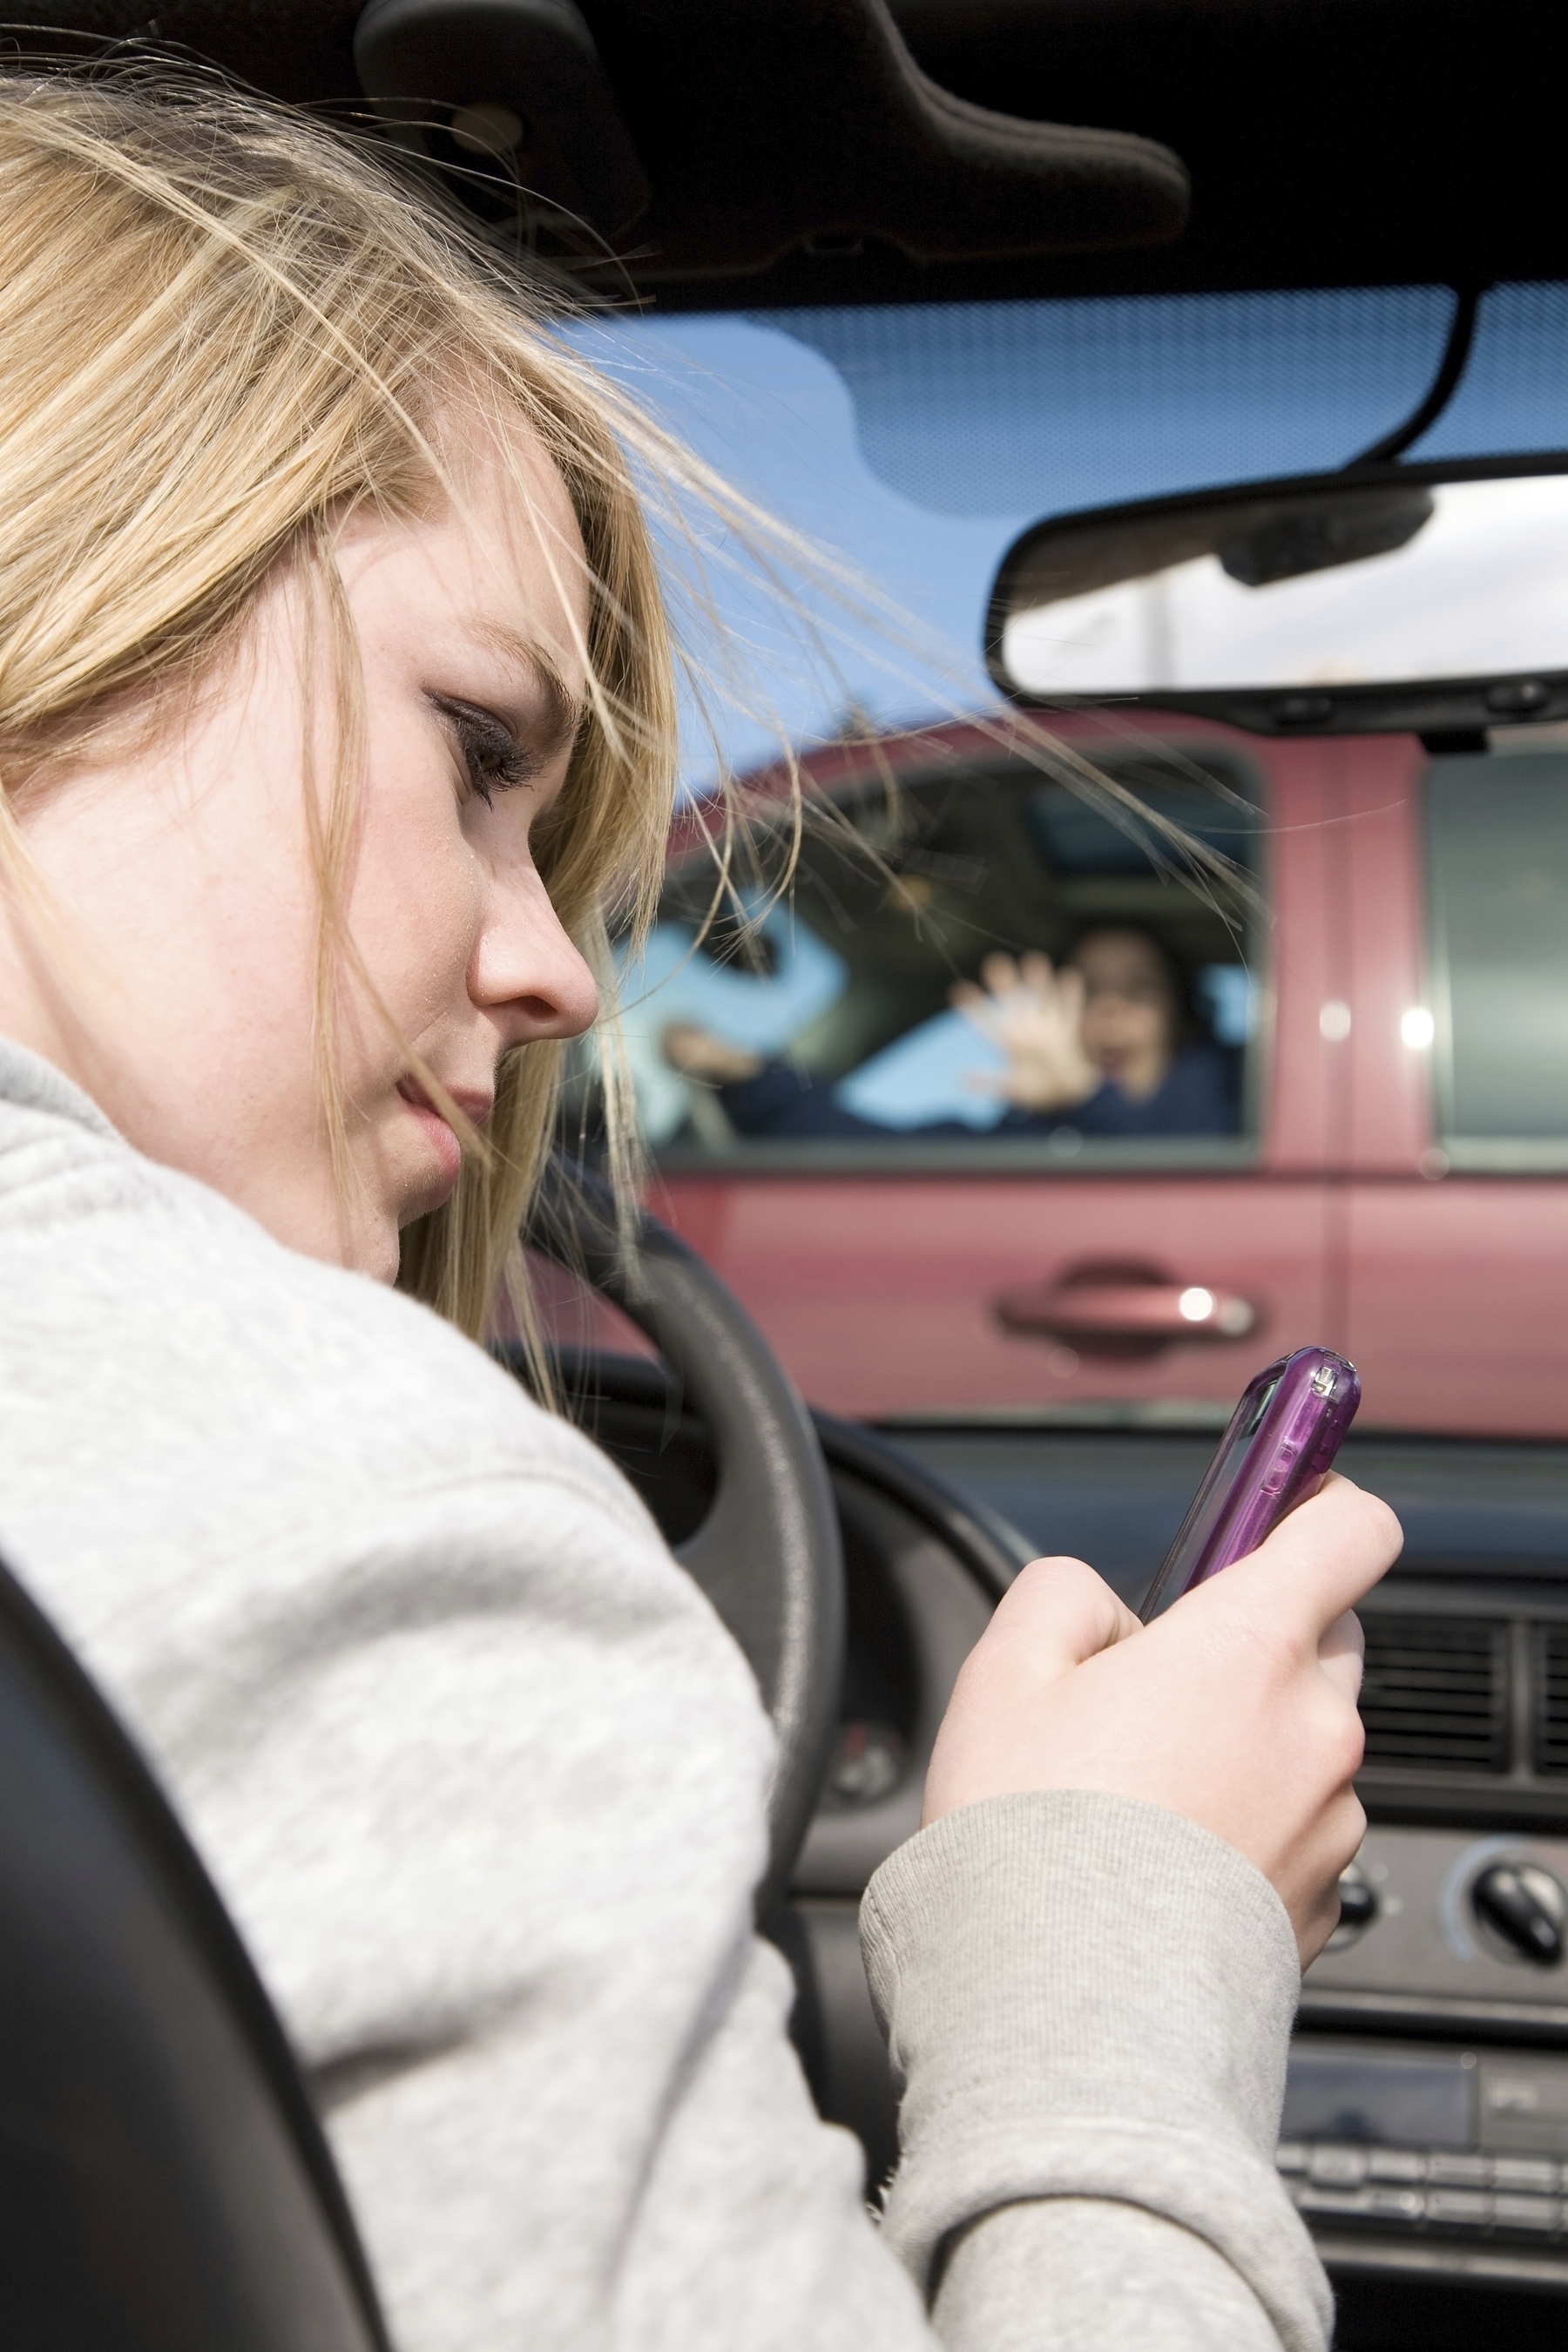 Good2Go(R) Auto Insurance introduces the Cell Phone Safety Discount for drivers who install text blocking devices to reward drivers taking action to be safer and more responsible on the road. This image must be used in conjunction with the news release with which it was originally distributed. alanpoulson/iStock/GettyImages.  (PRNewsFoto/Good2Go(R) Auto Insurance)